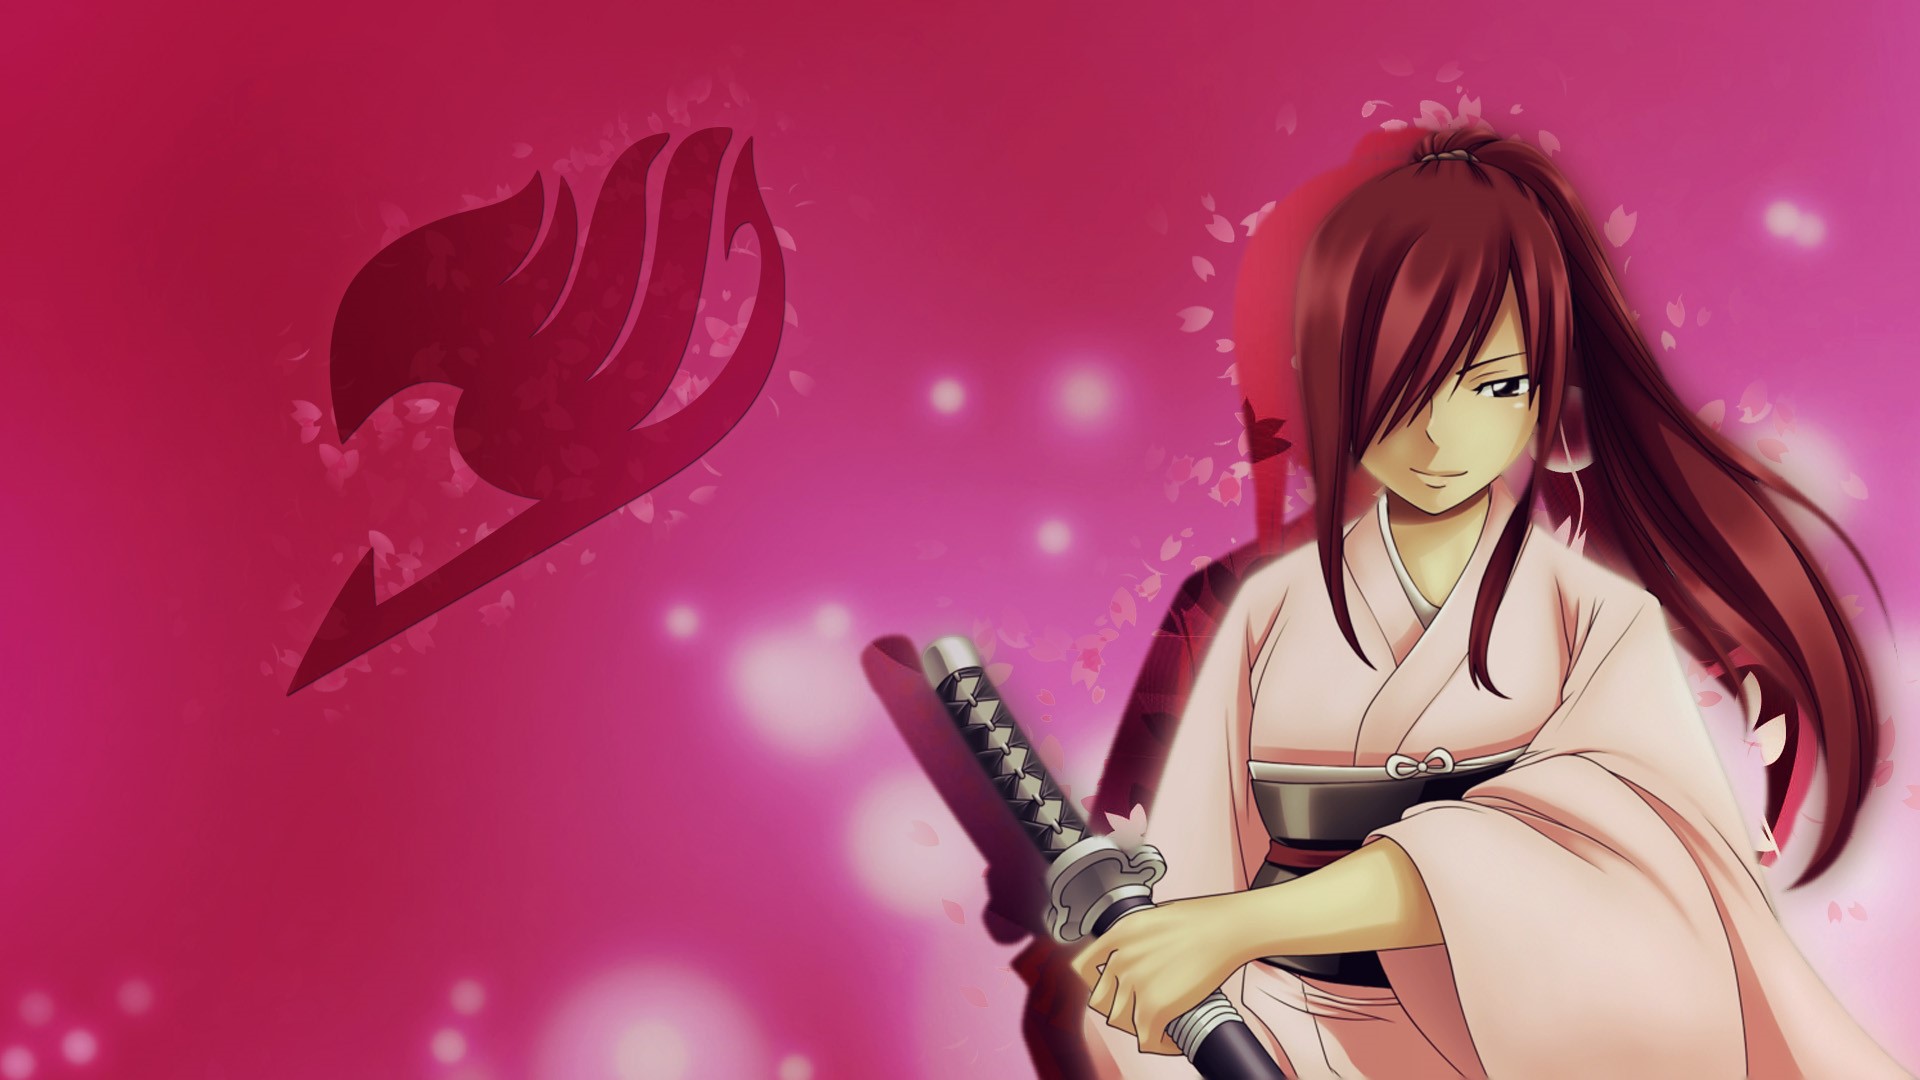 Erza Scarlet Fairy Tail Mage Sword Art Anime